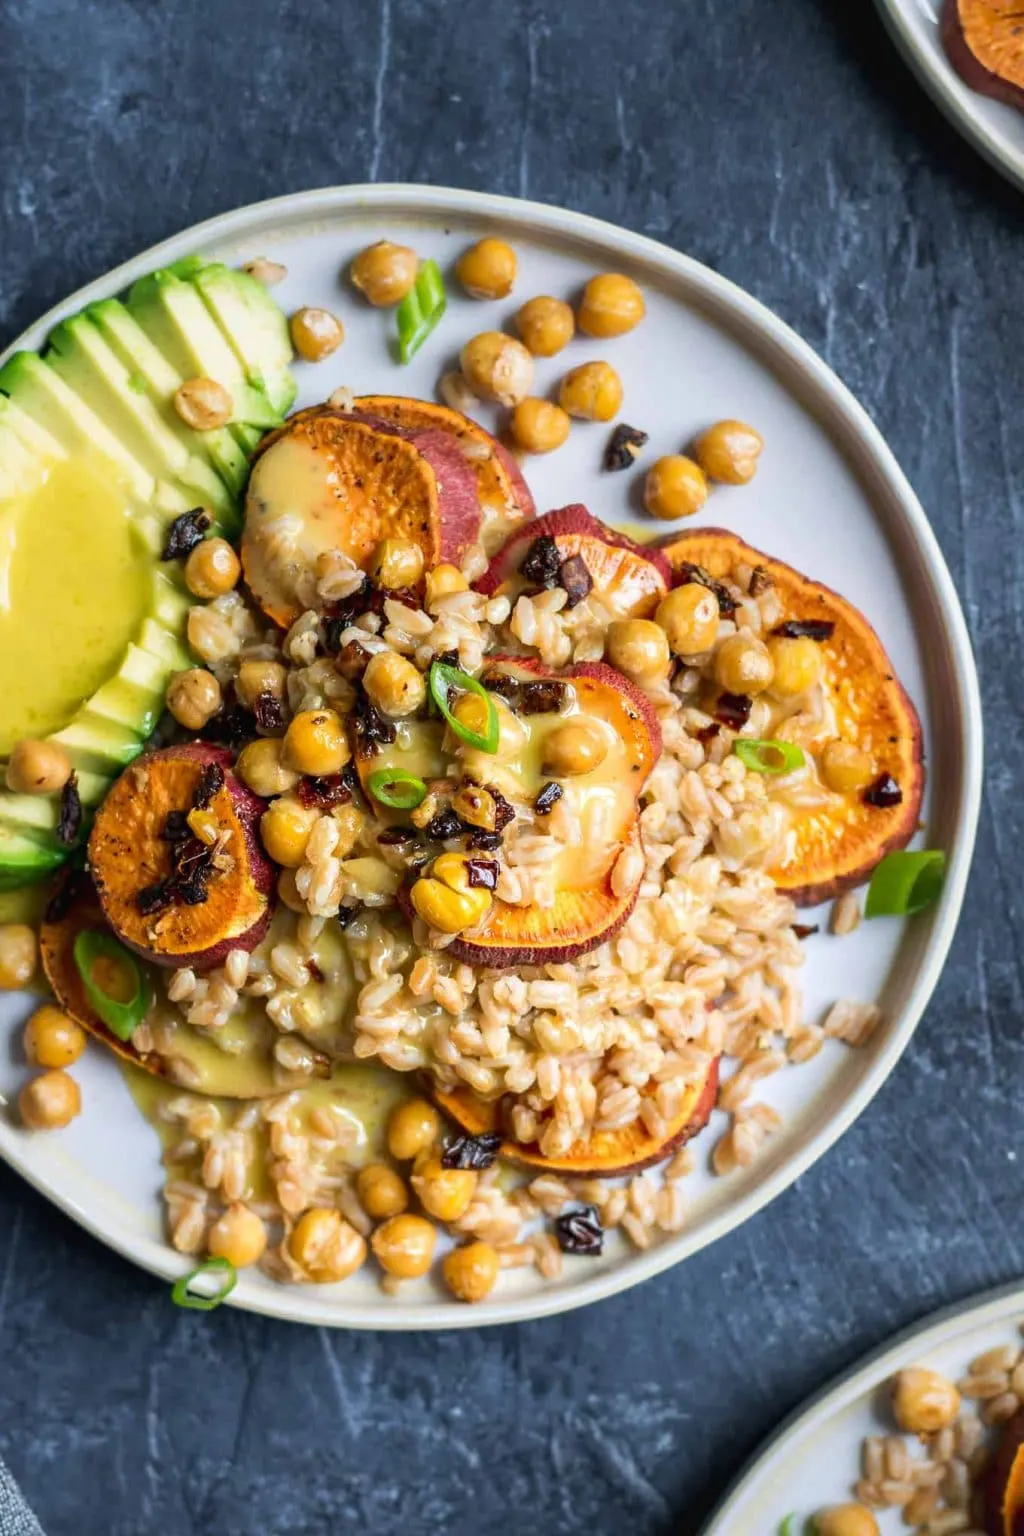 Roasted sweet potato and farro salad with garlicky chickpeas with sun dried tomatoes, avocado, and a lemon vinaigrette. Garnished with sliced scallion greens.